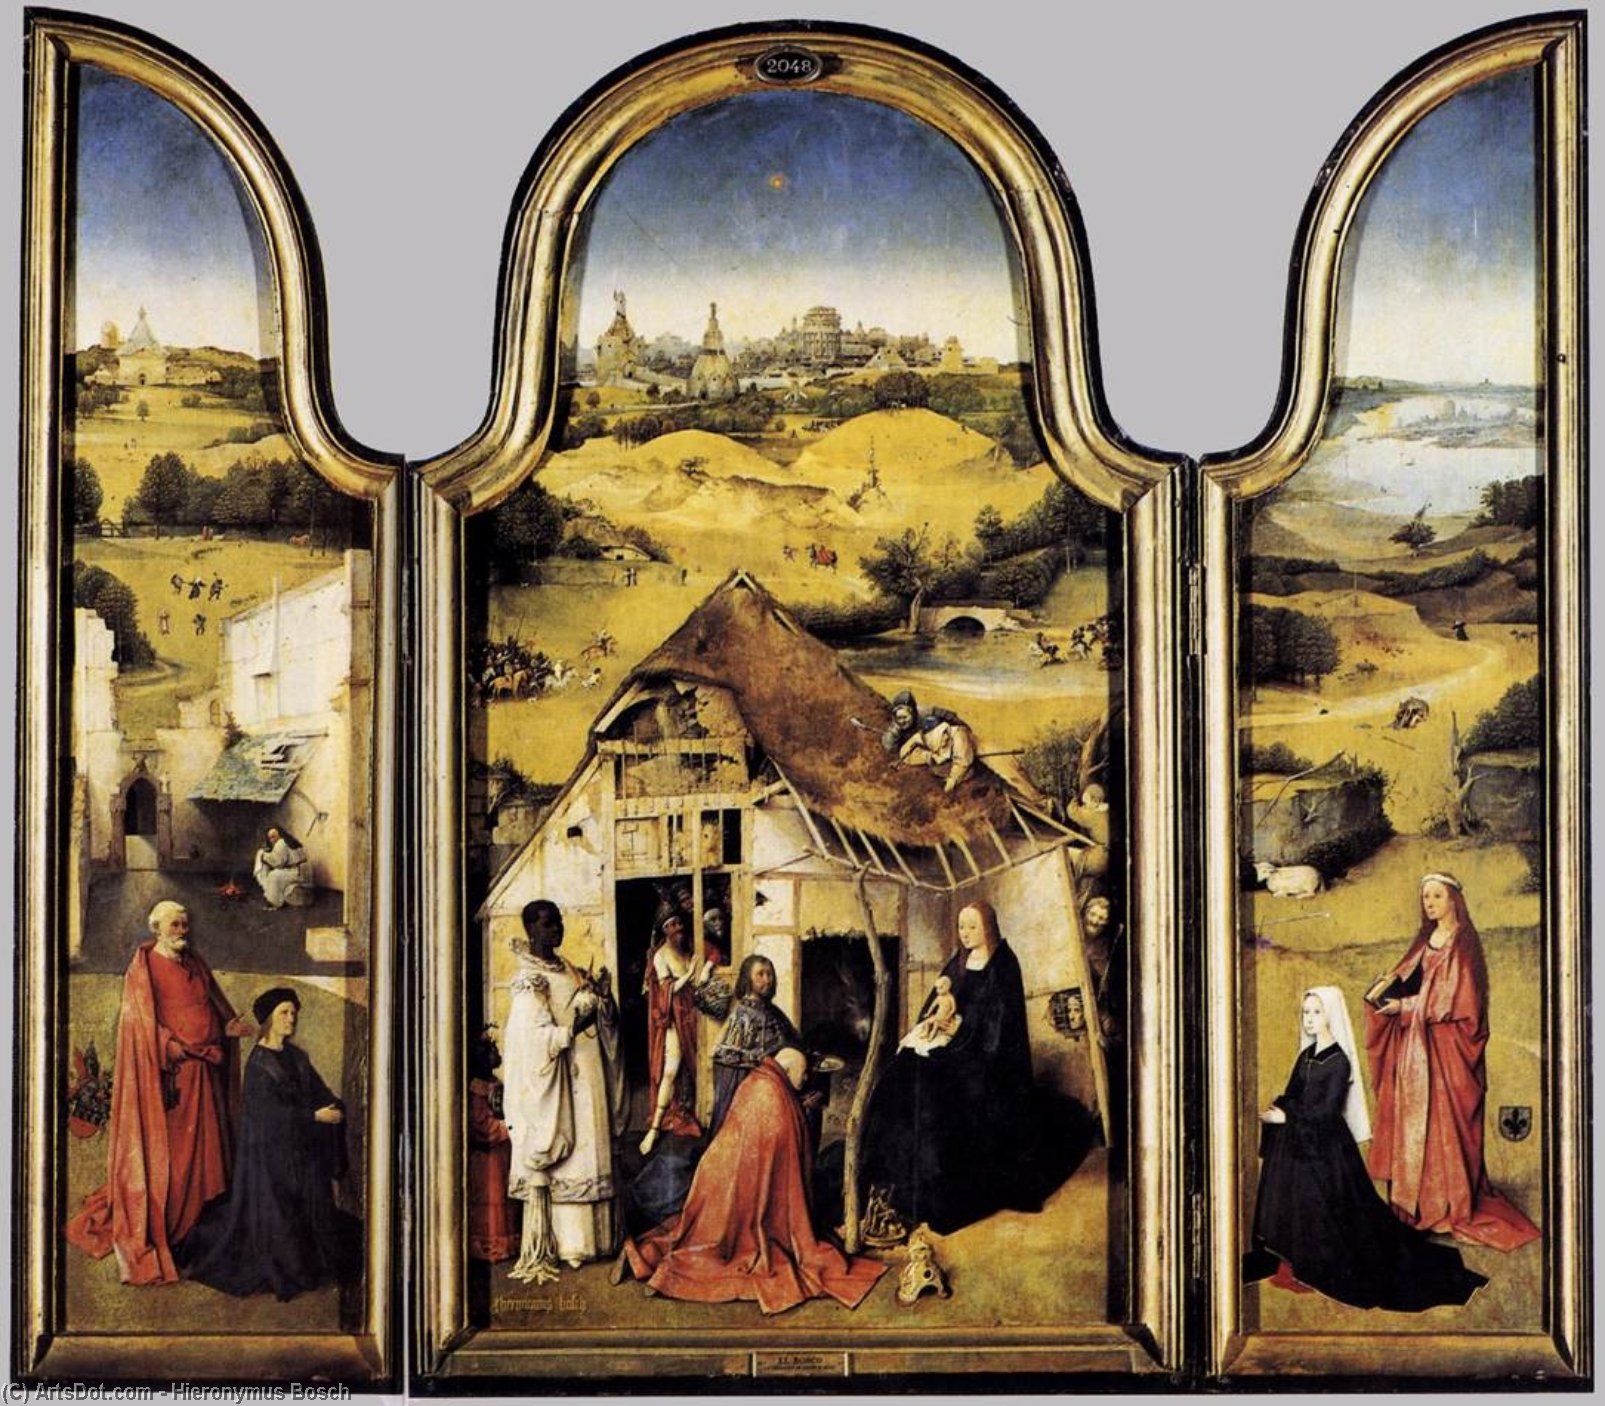 WikiOO.org - Encyclopedia of Fine Arts - Lukisan, Artwork Hieronymus Bosch - Triptych of the Adoration of the Magi